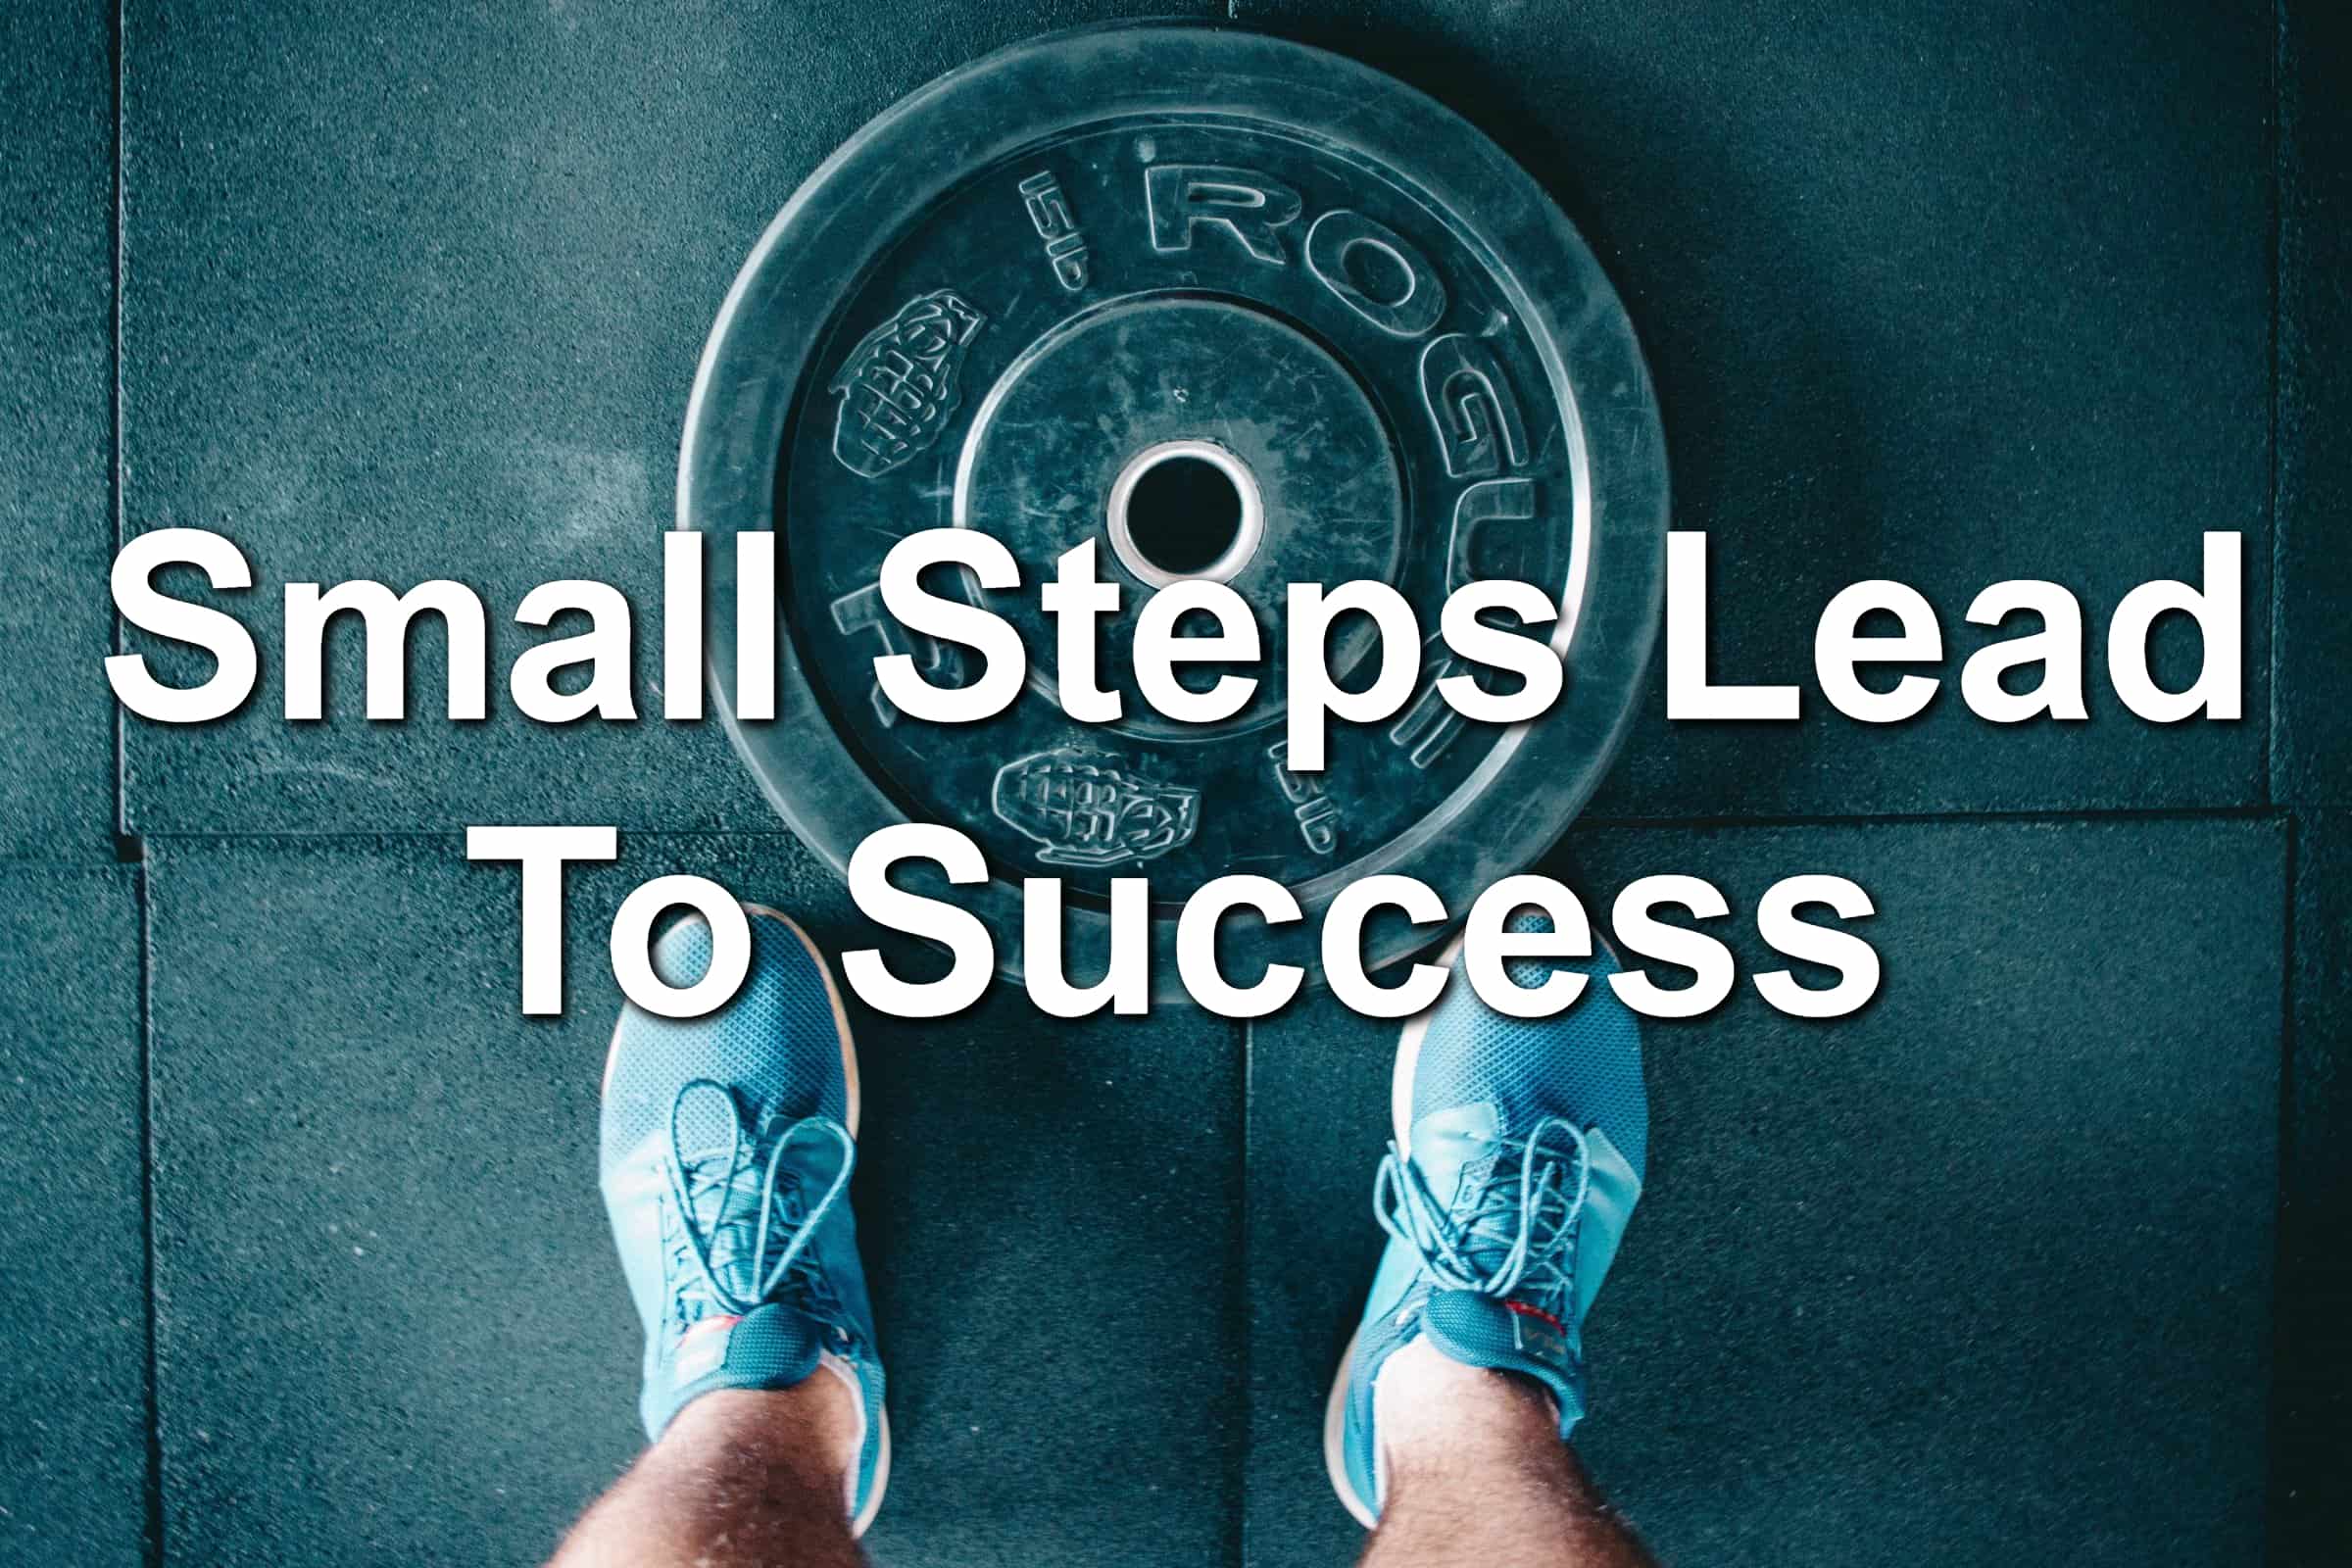 Small steps lead to success